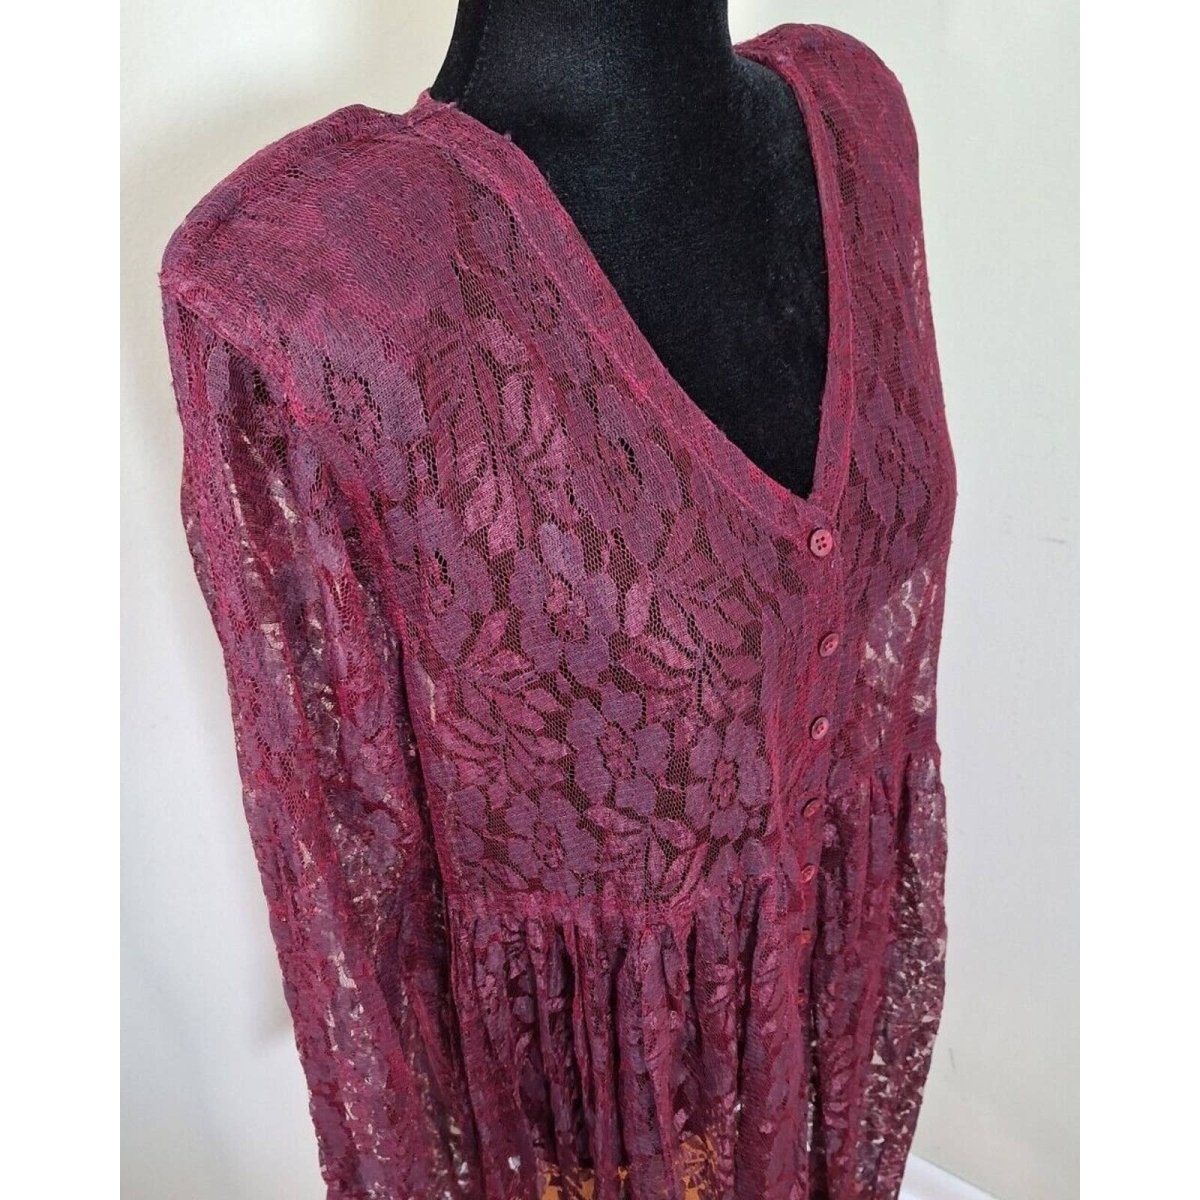 Vintage 90s Oxblood Sheer Lace Babydoll Dress Women's Size Medium - themallvintage The Mall Vintage